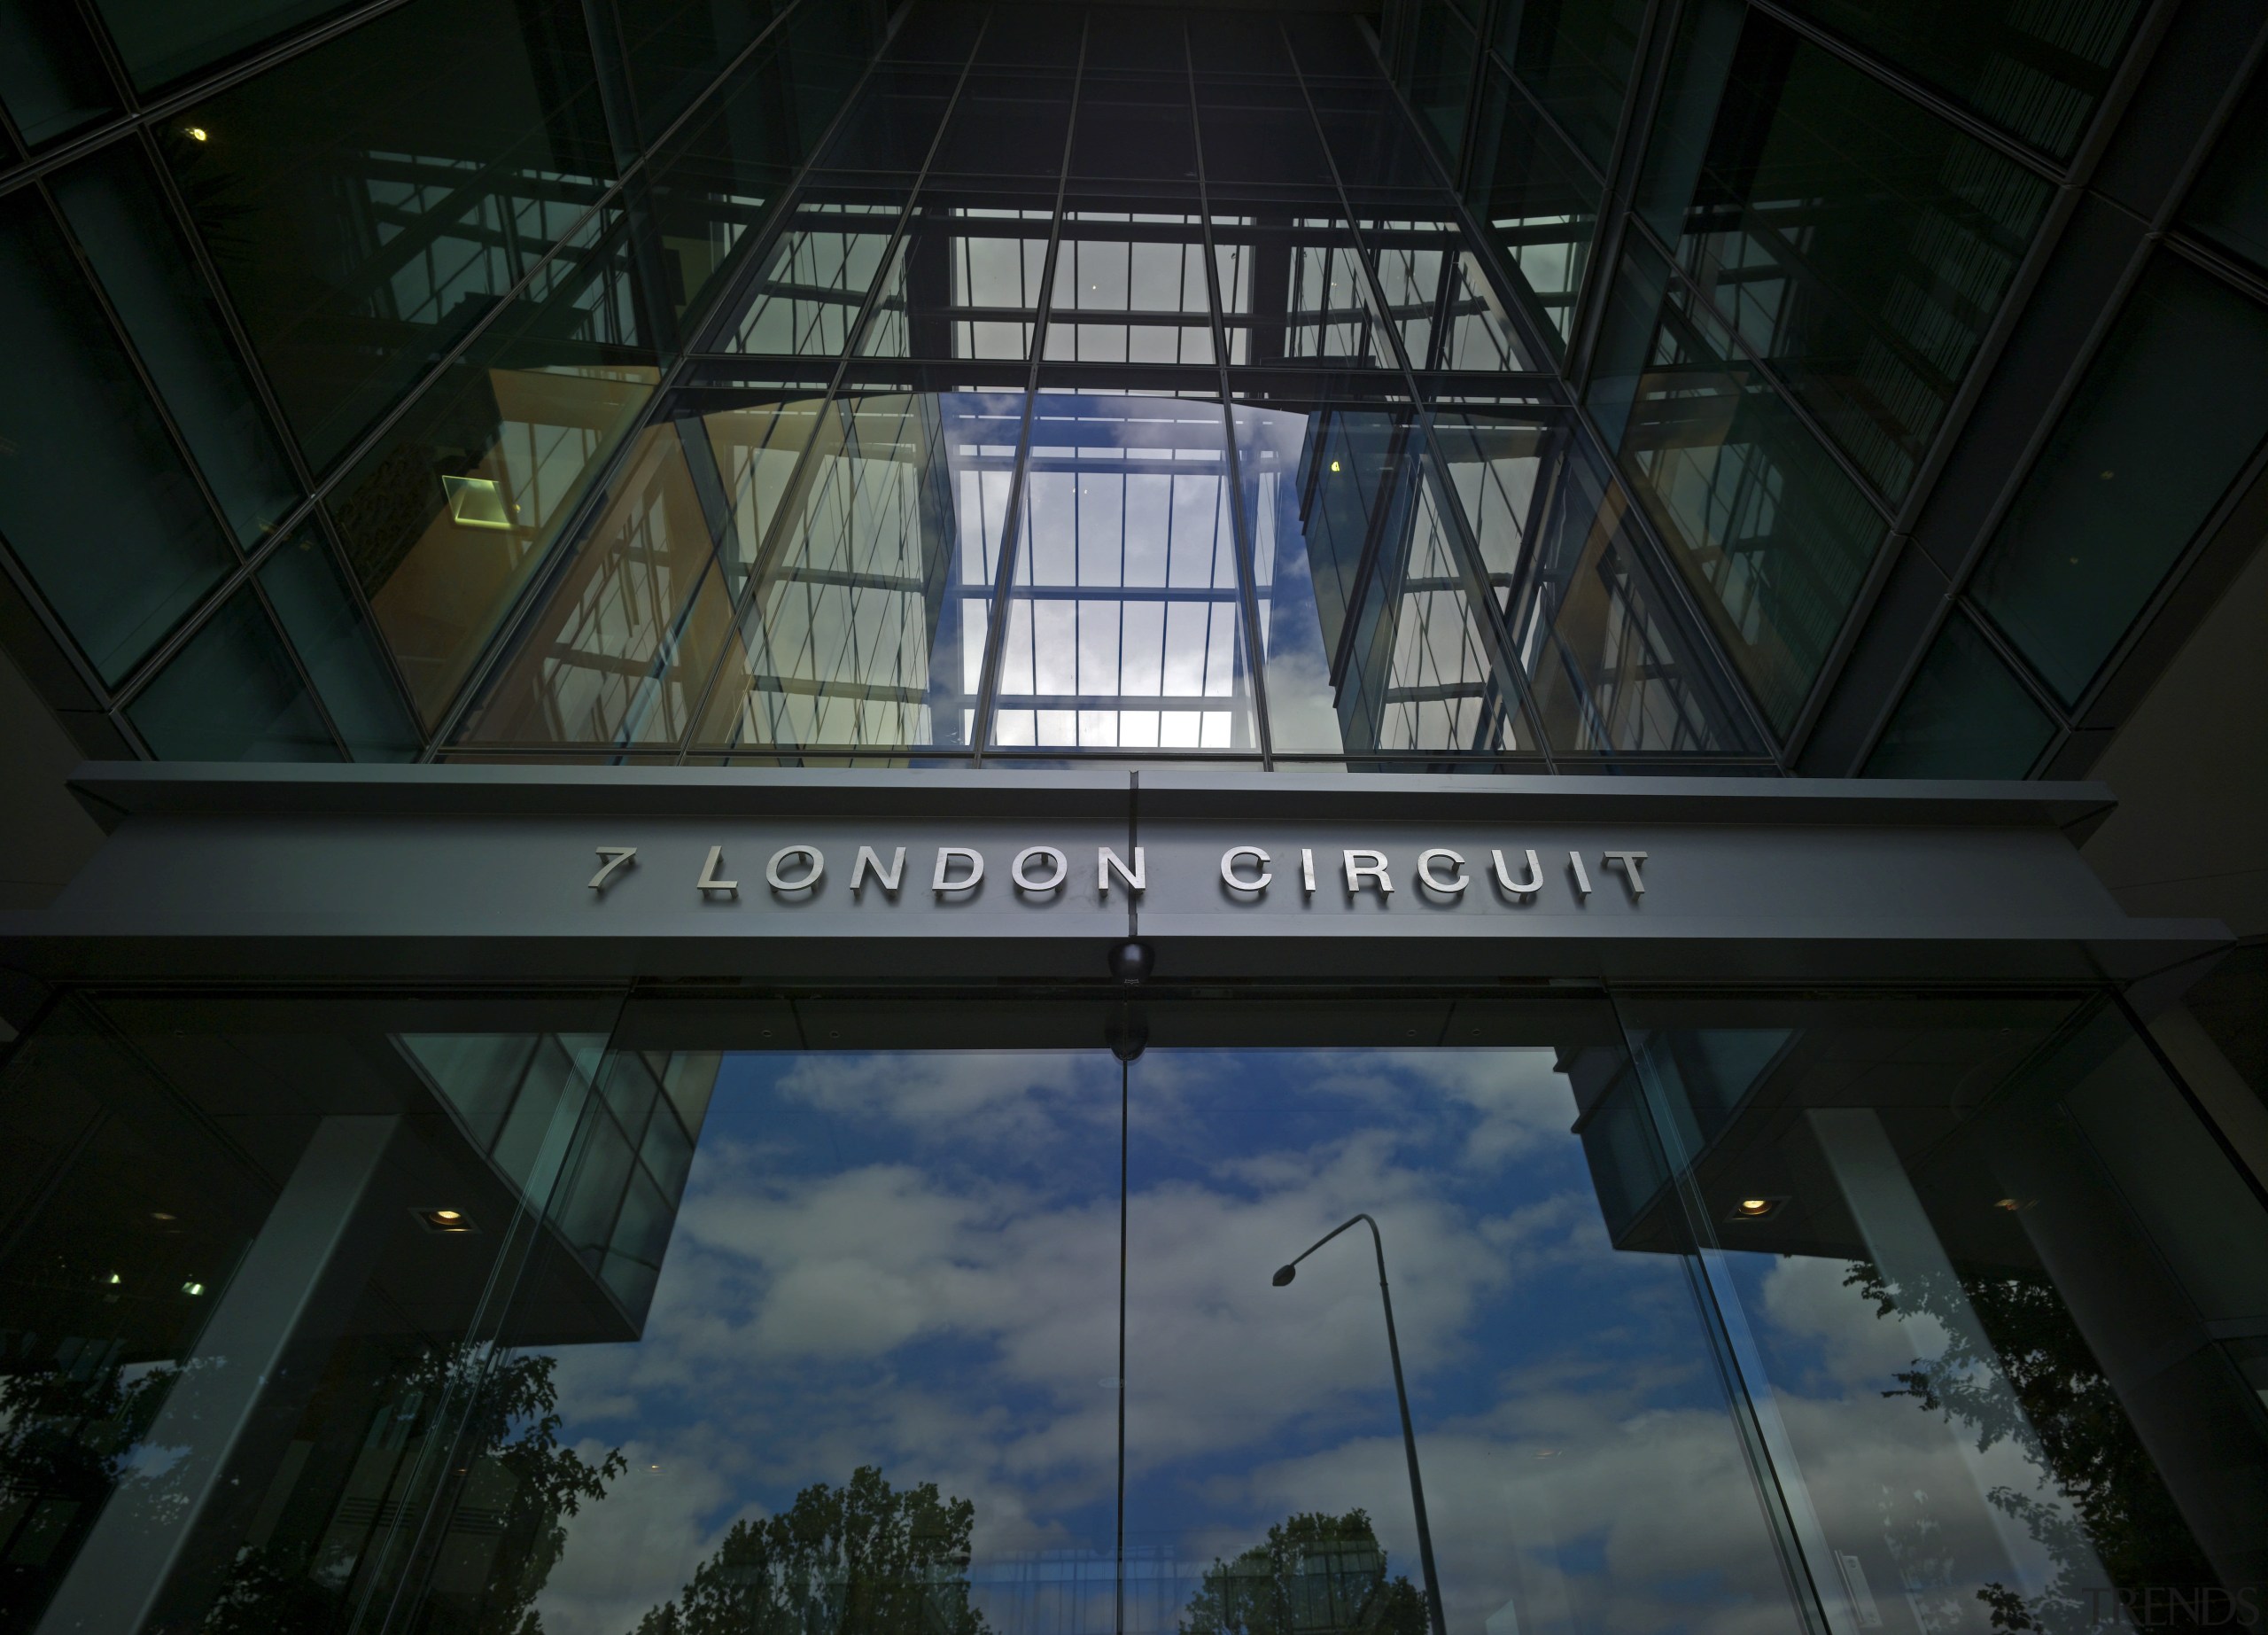 View of 7 London Circuit in Canberra. Leighton architecture, building, darkness, daylighting, daytime, glass, metropolitan area, reflection, sky, structure, black